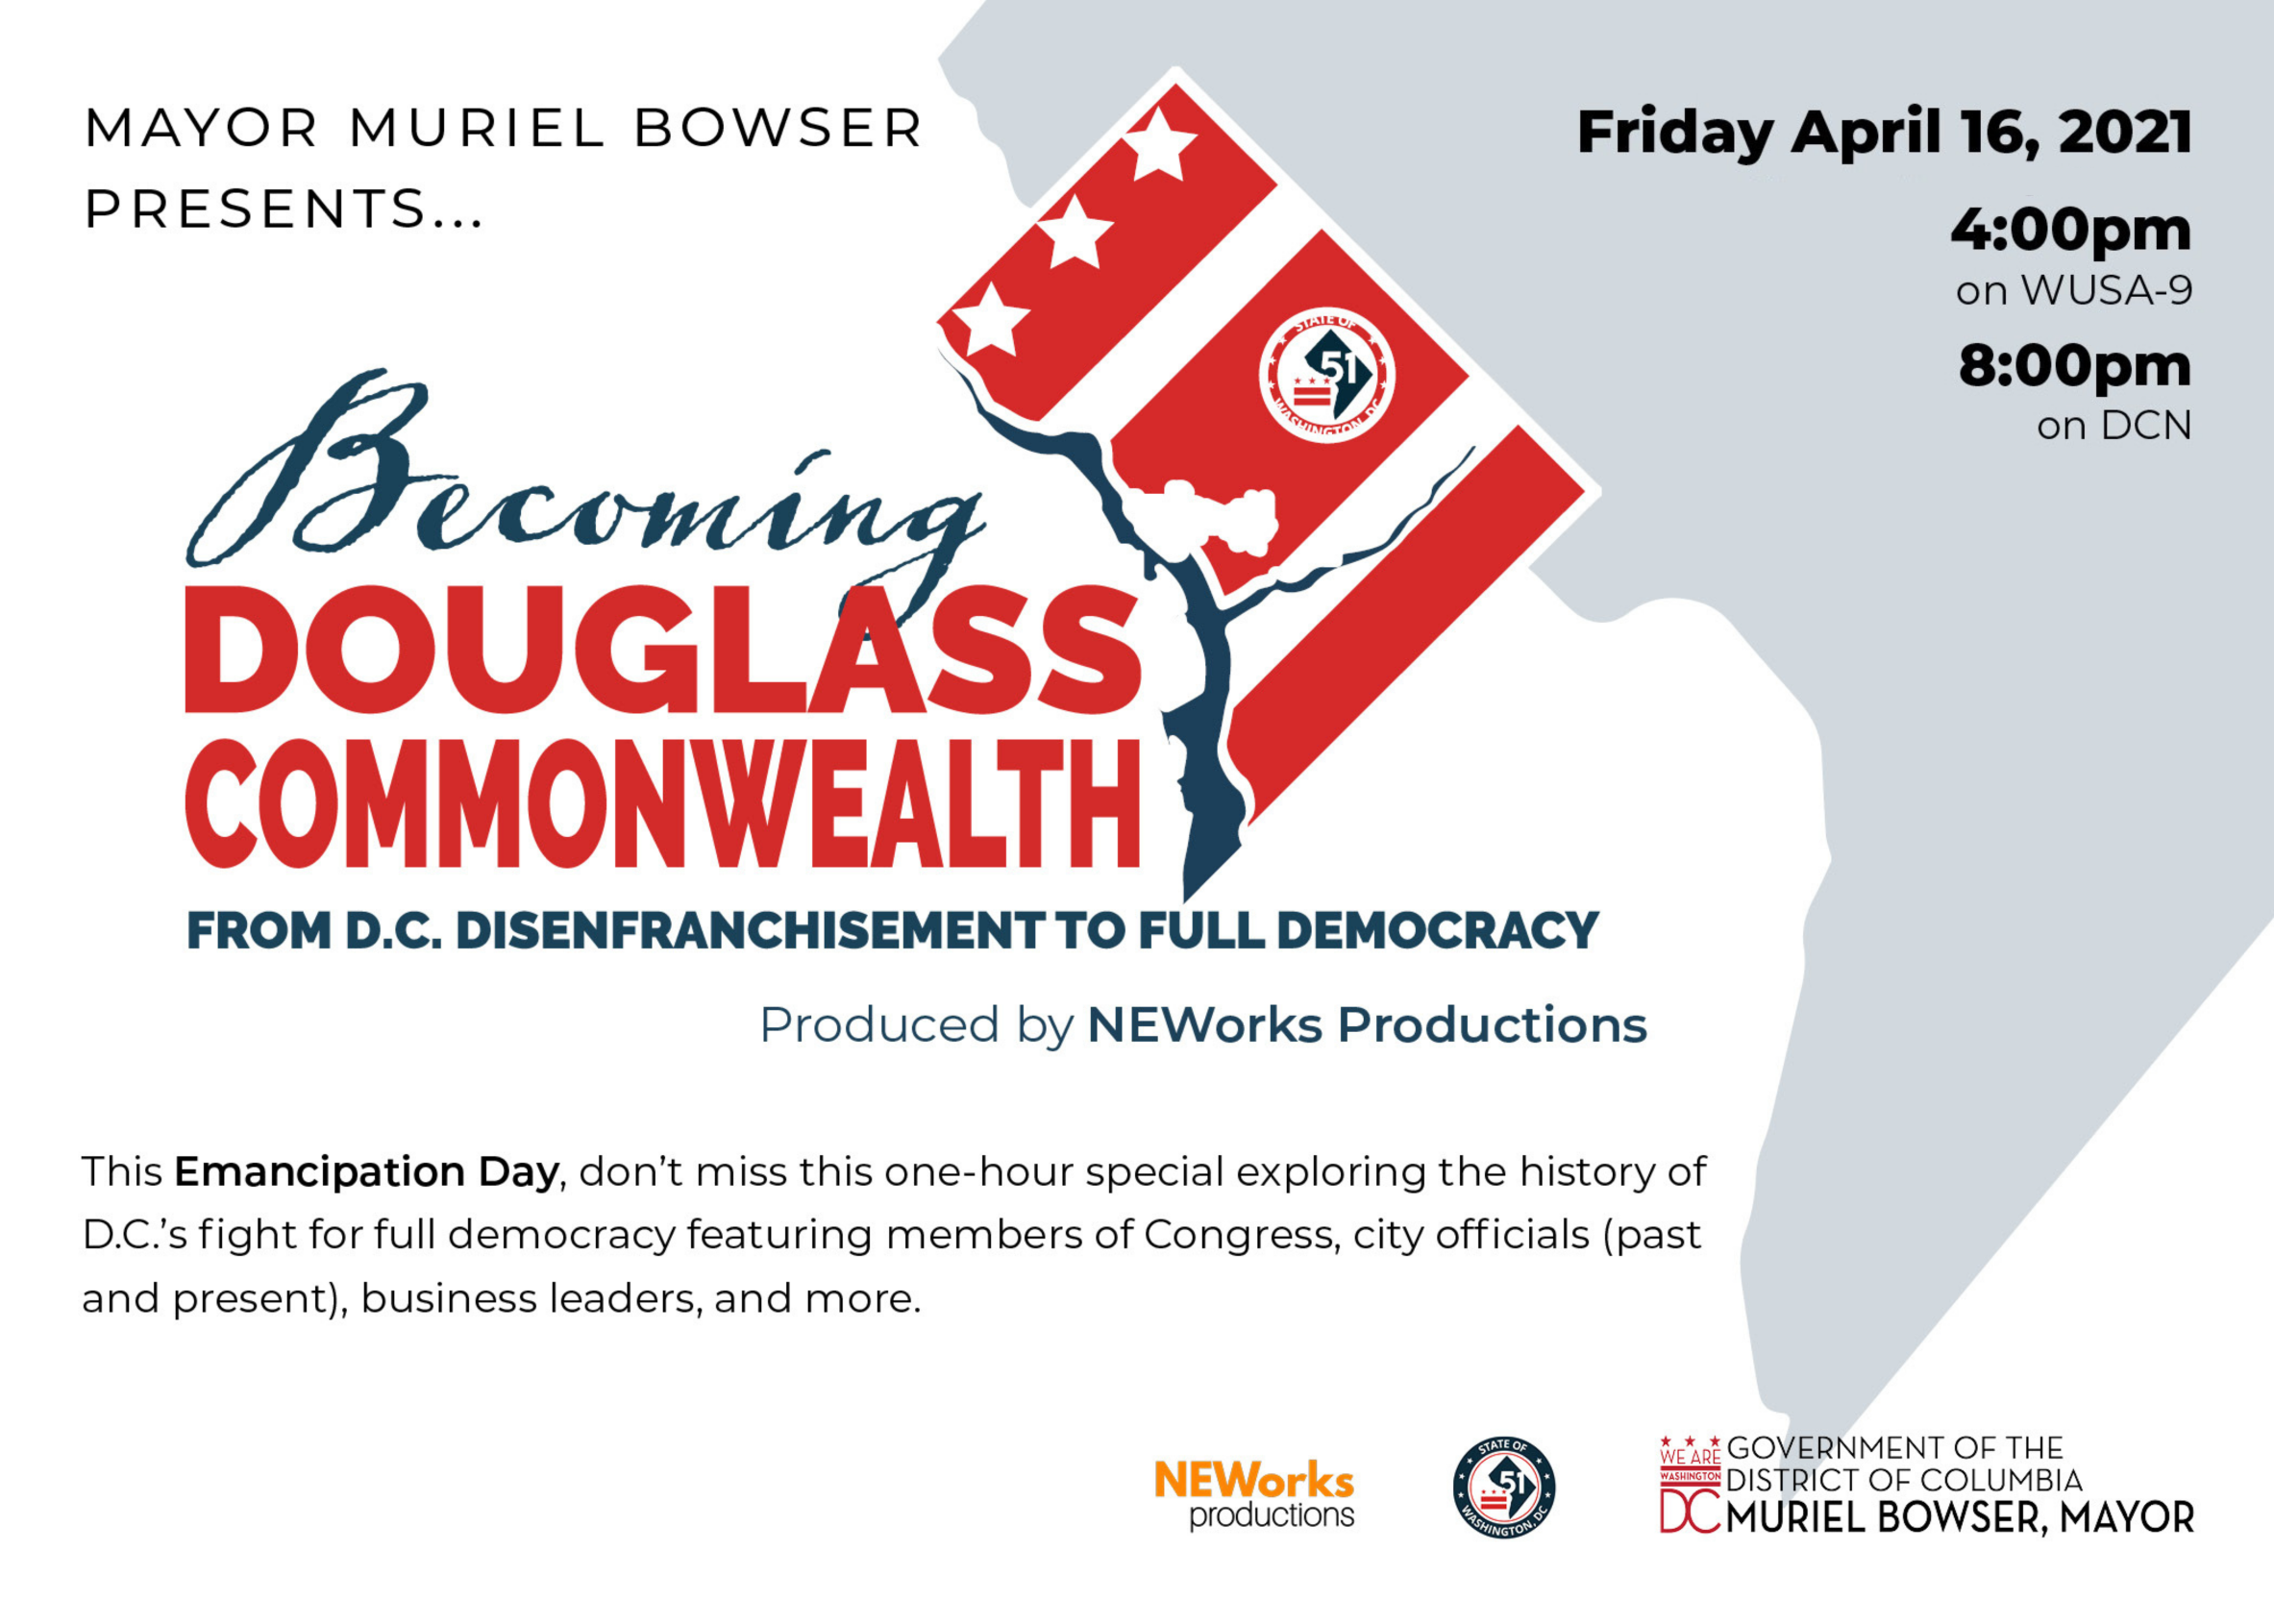 Mayor Muriel Bowser Presents….Becoming Douglass Commonwealth From D.C. Disenfranchisement to Full Democracy